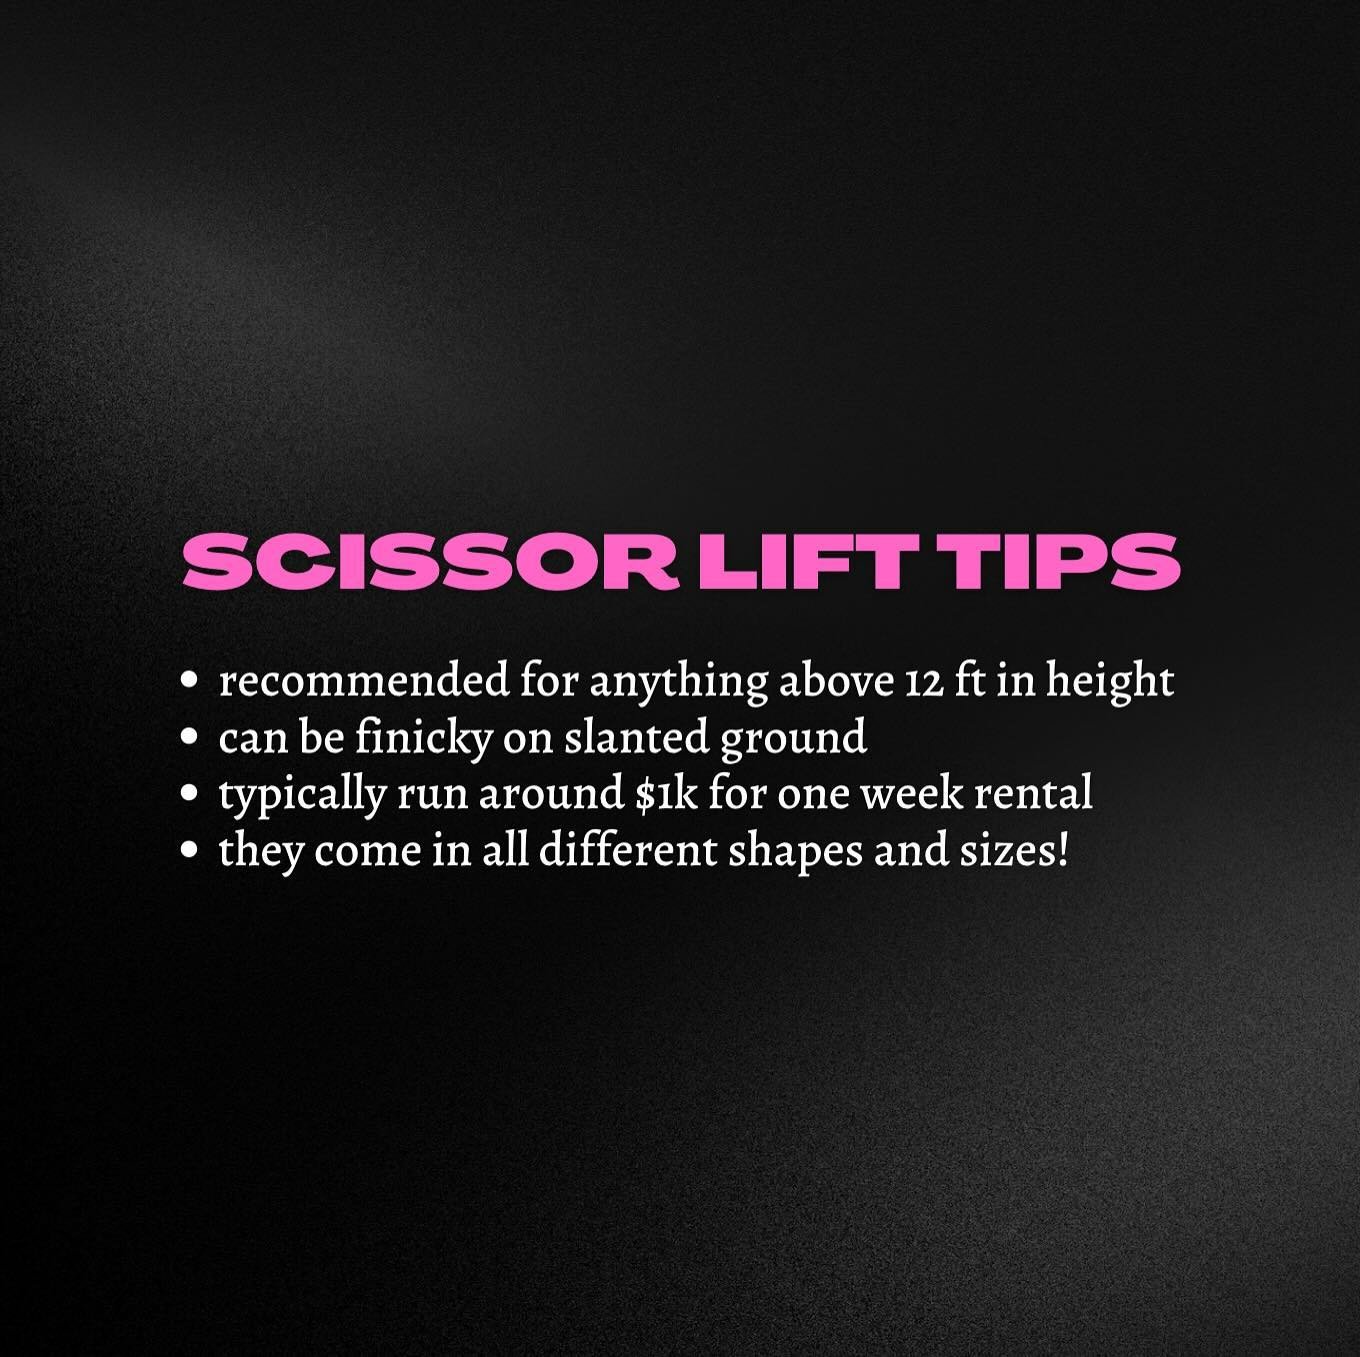 My personal tips! I always try to order a scissor lift over a boom if I can because I find they&rsquo;re easier to maneuver. However, a boom can reach trickier spots on a wall. Every project is different! 

For more mural tips- head to my blog or che